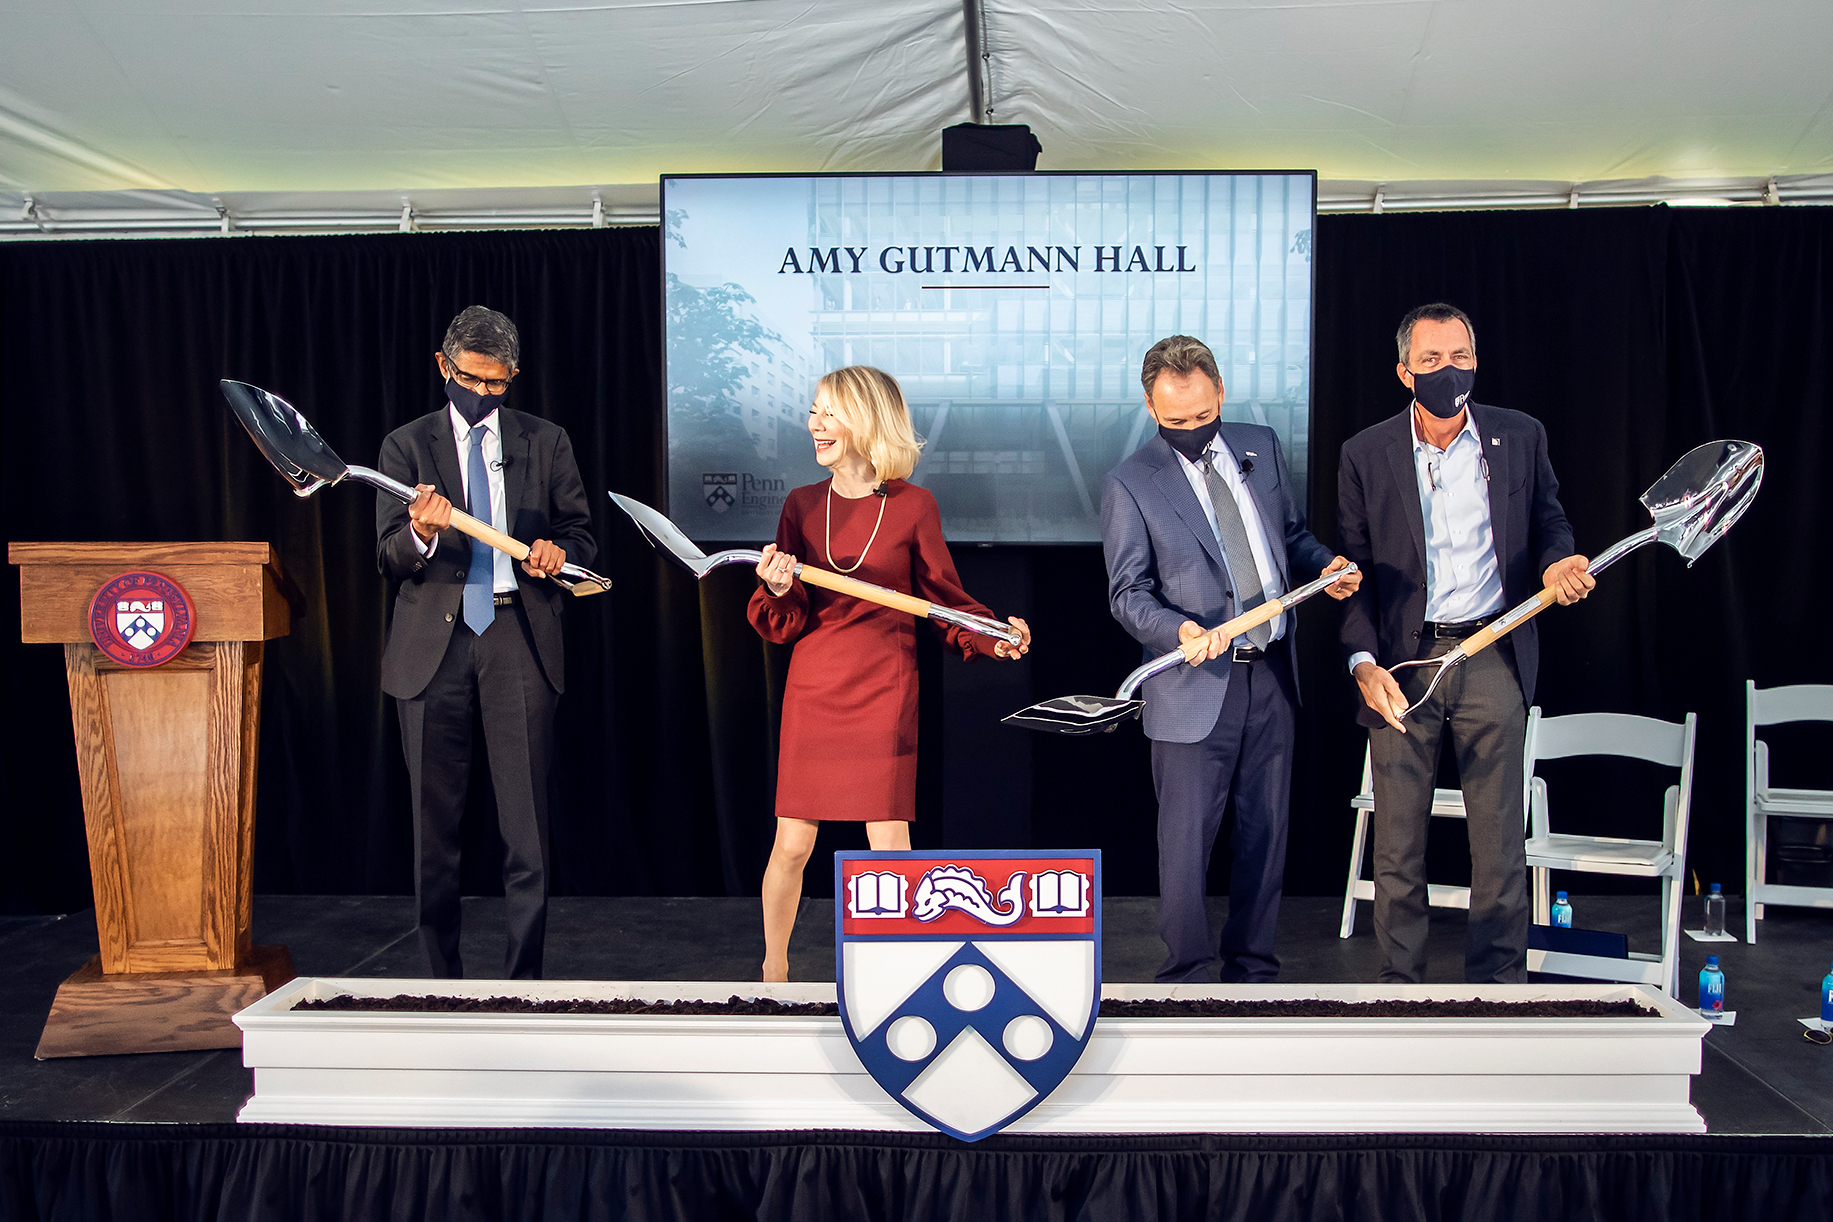 vijay kumar, amy gutmann, Harlan Stone, and Rob Stavis with shovels digging into a trough of dirt on a stage with amy gutmann hall on a screen behind them